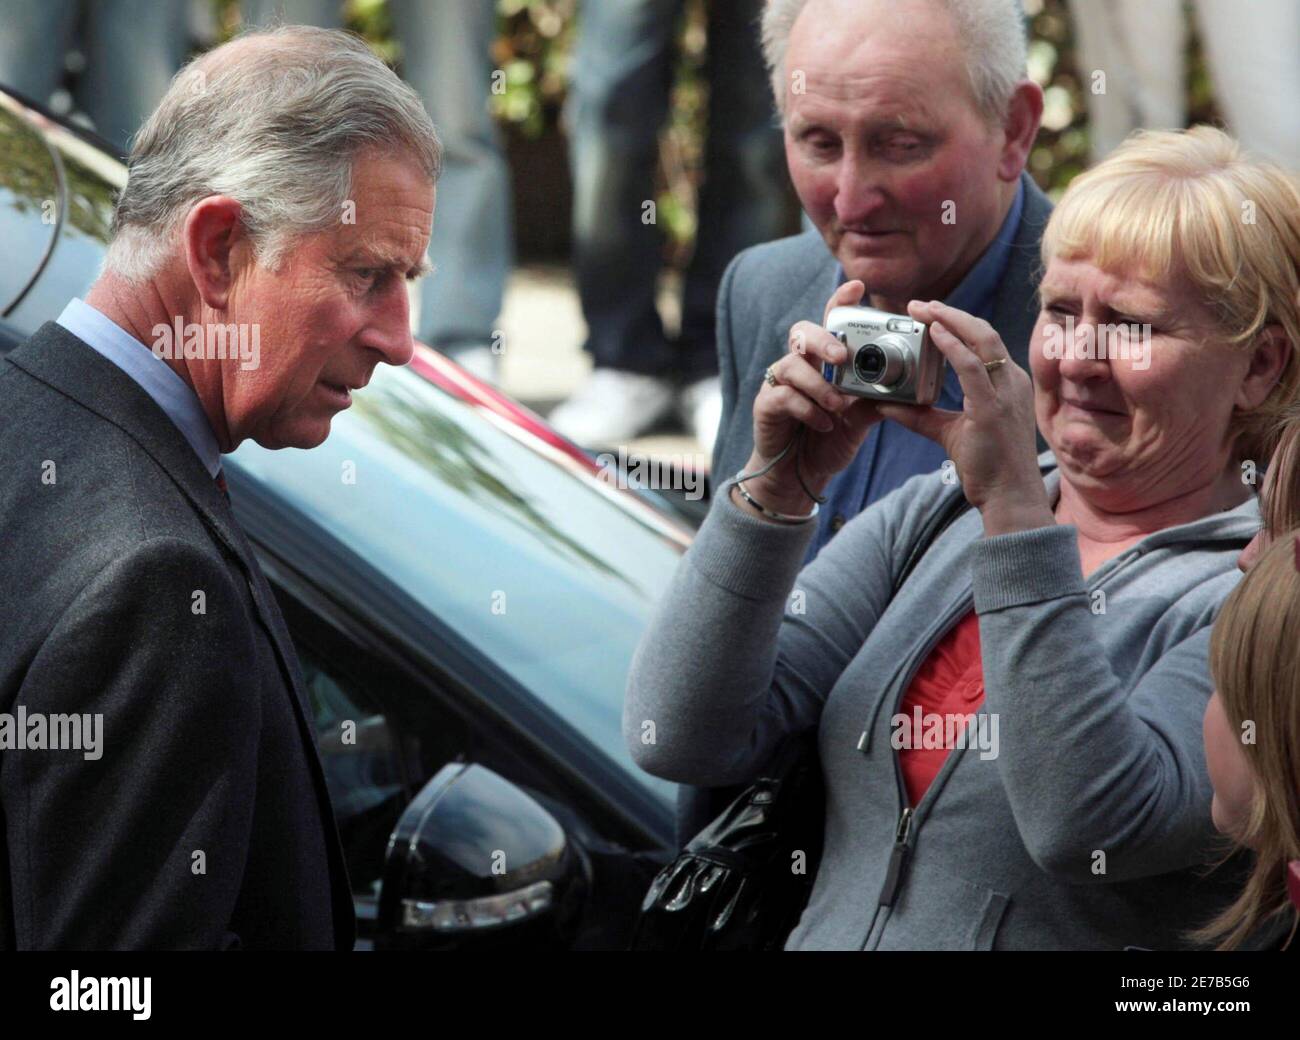 Britain's Prince Charles (L) talks to local residents outside The Orkney Traditional Music Project in Kirkwall during a visit to the island of Orkney, in Scotland June 1, 2009.    REUTERS/ David Cheskin/Pool   (BRITAIN ENTERTAINMENT ROYALS SOCIETY) Stock Photo